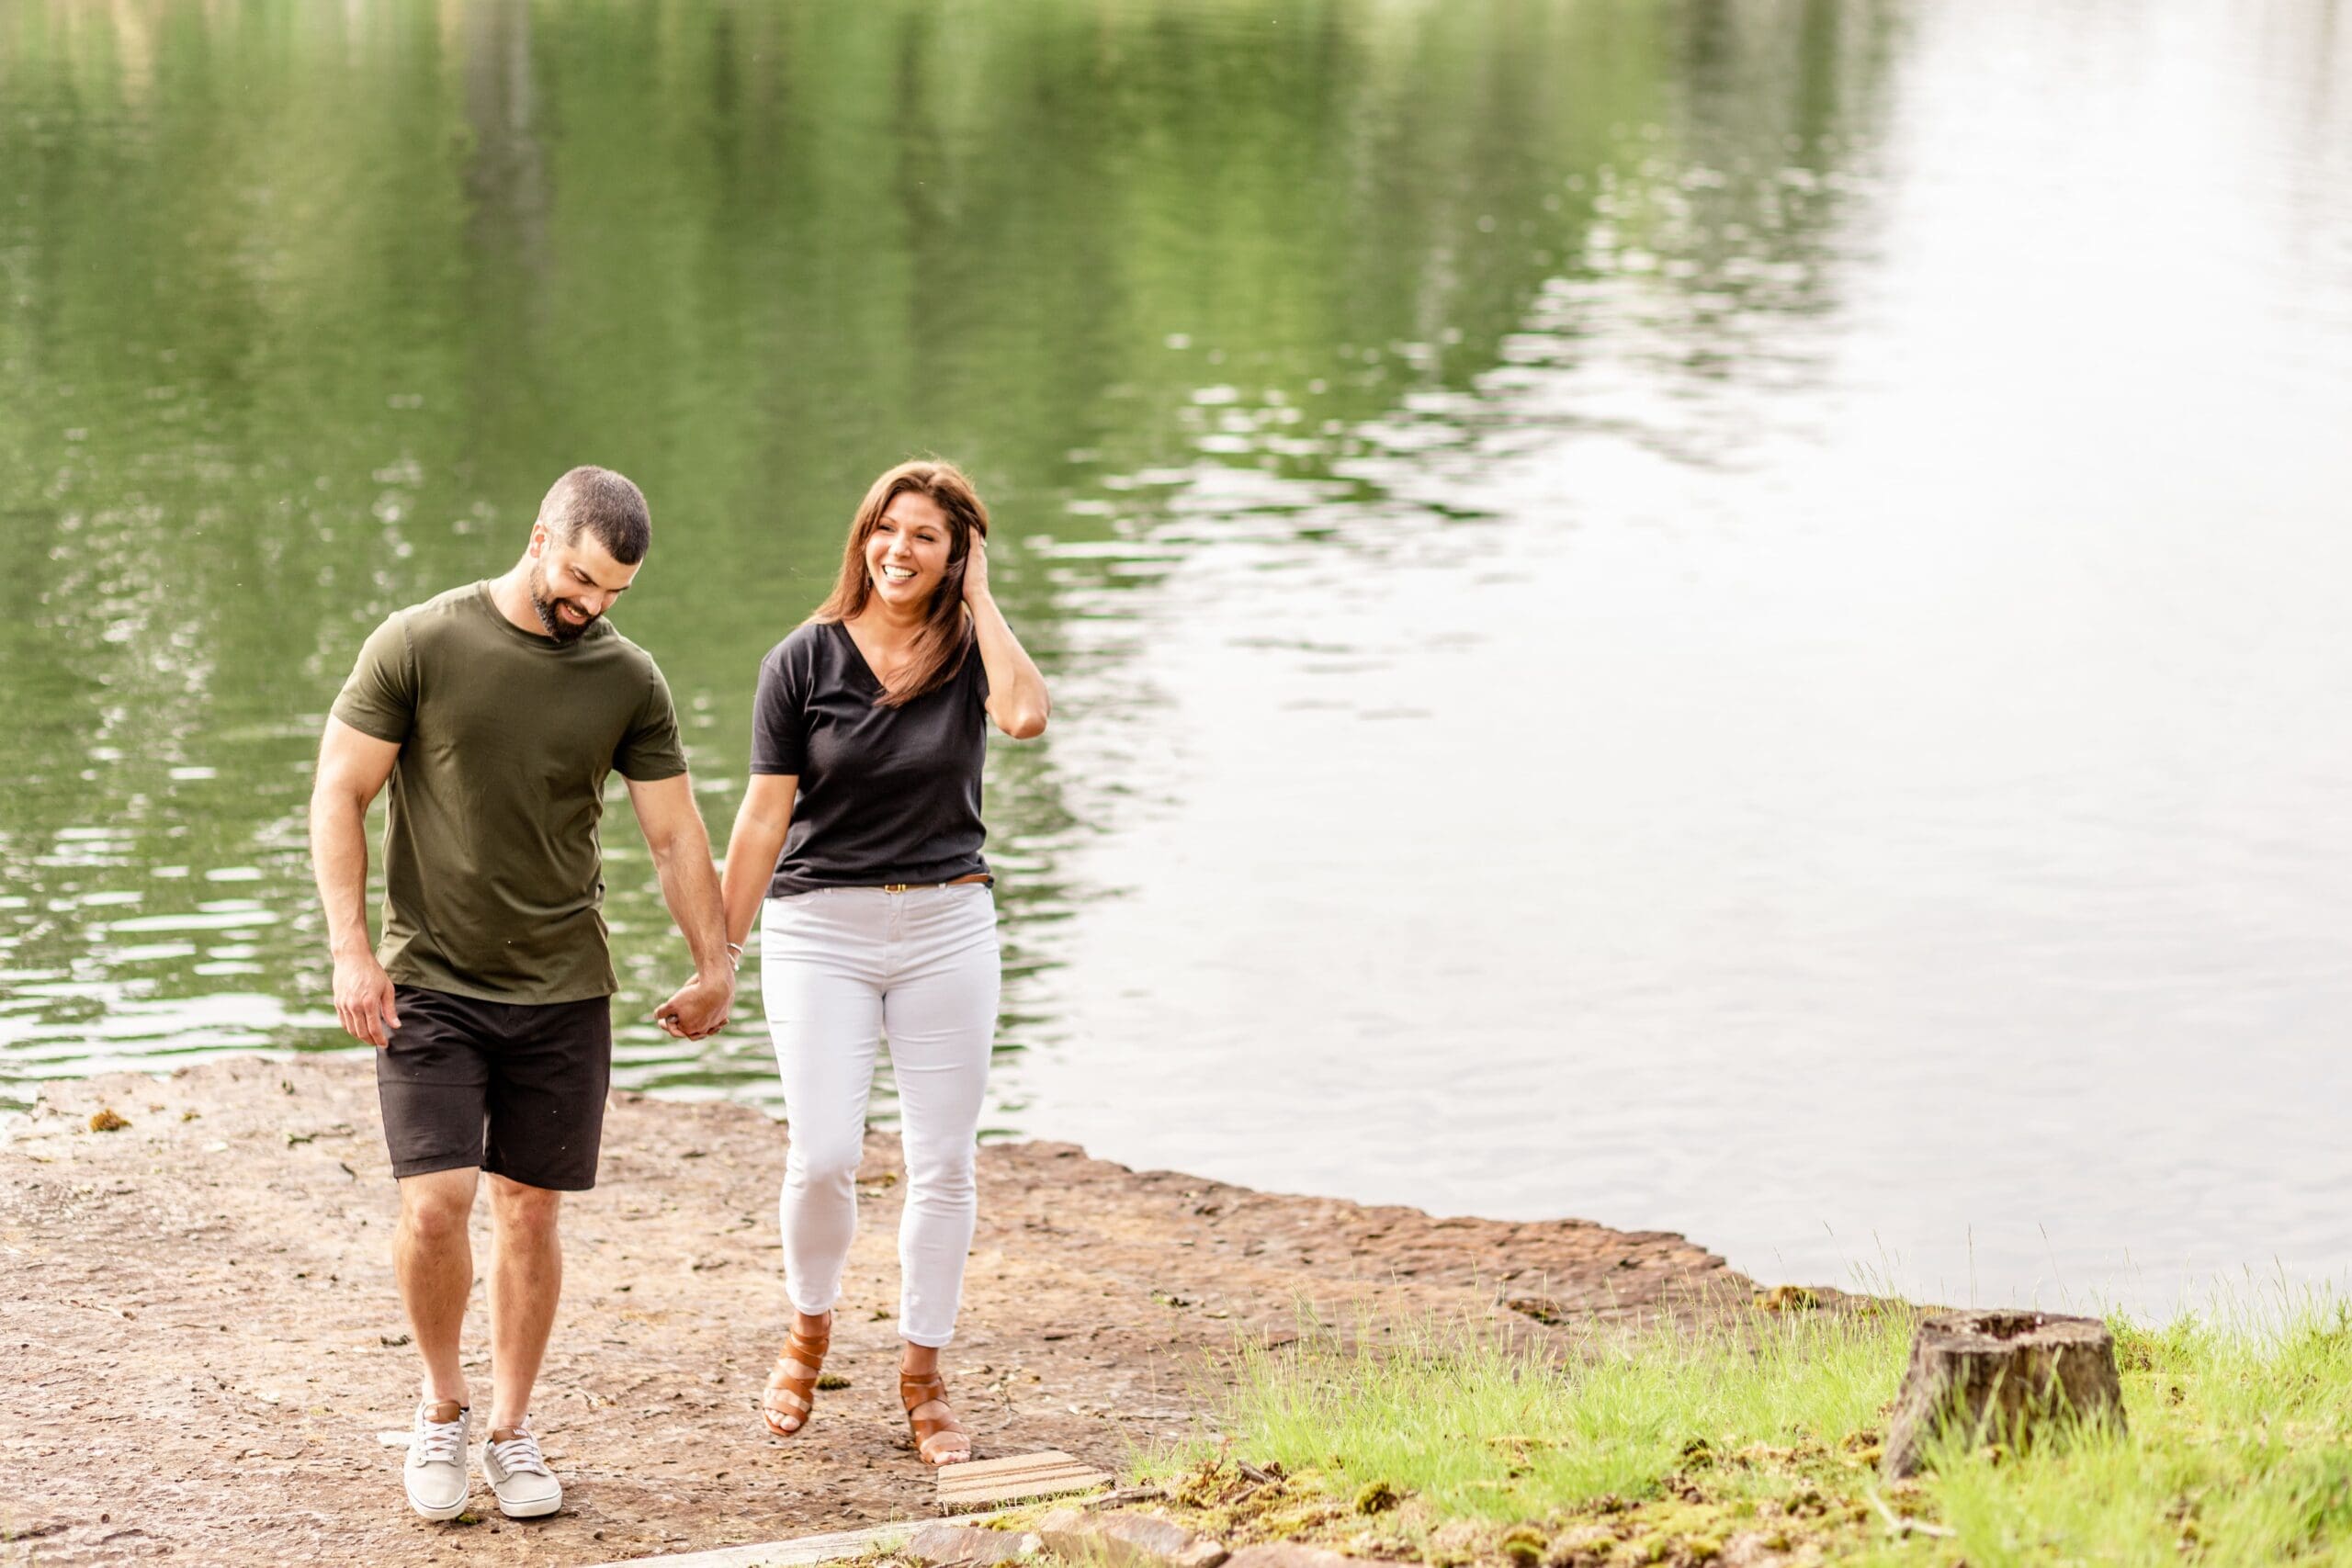 zach mcdearmon, meredith ashe, lake of egypt, M boutique, marion, marion illinois, engagement session, engaged couple, summer